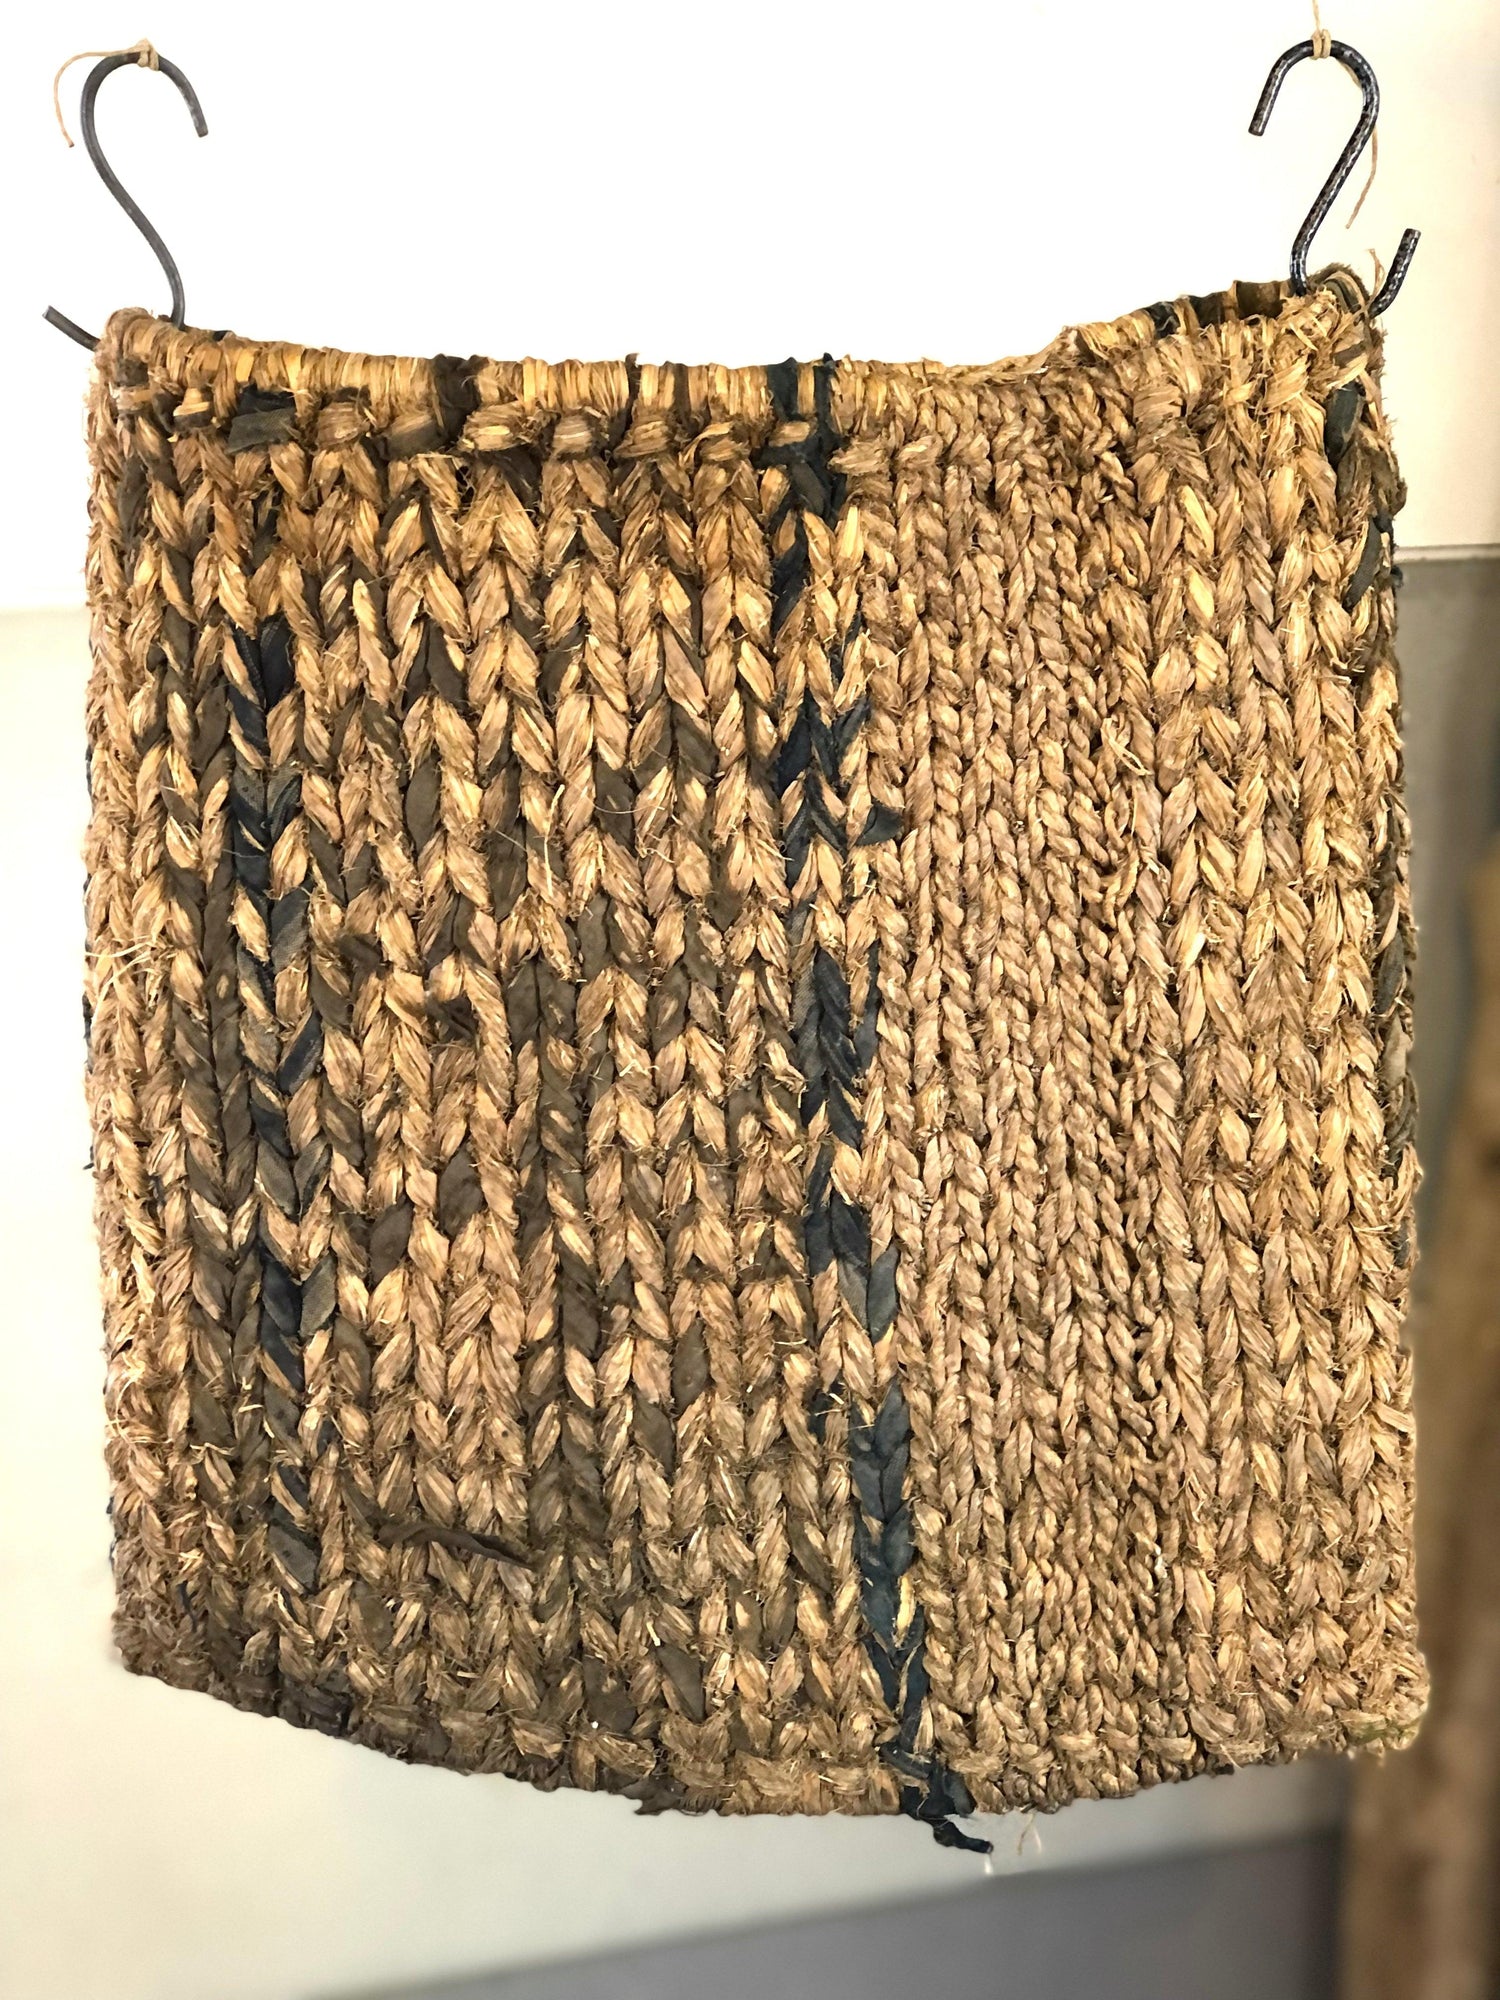 Japanese antique bag made of straw and cloth that is over 100 years old - VINTAGE BLUE JAPAN